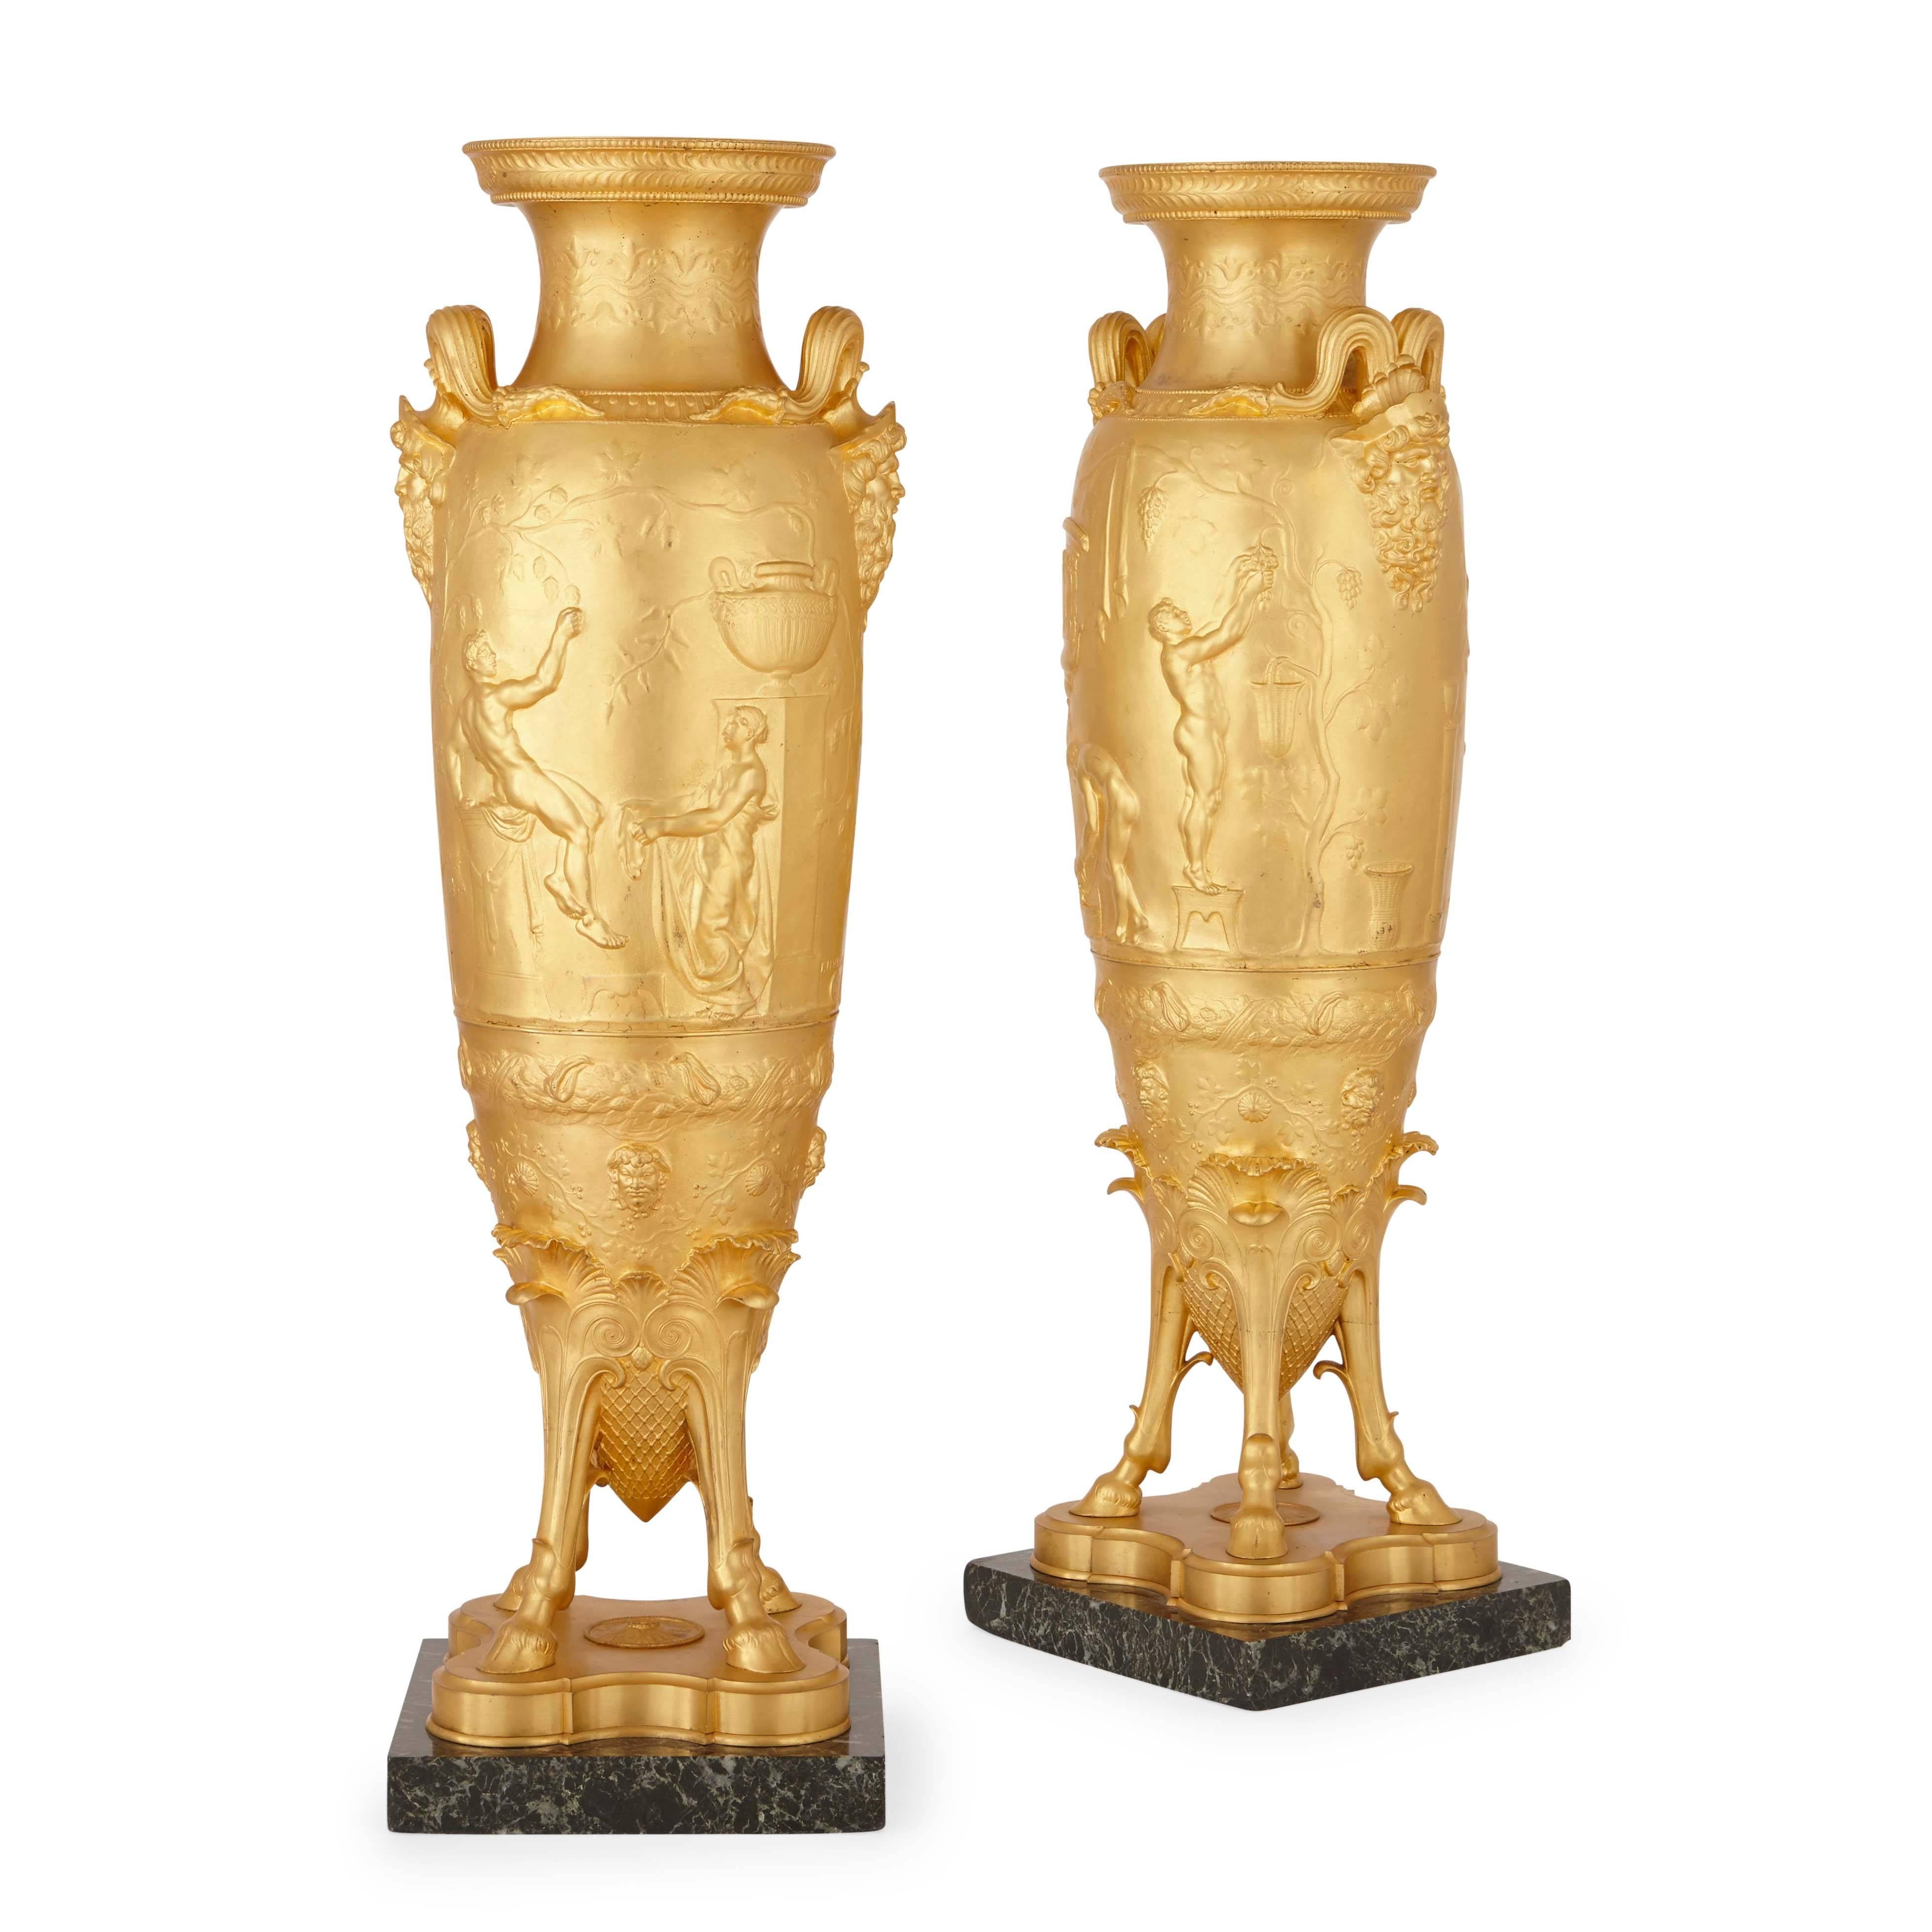 The exquisite gilt bronze (ormolu) vases decorated with alternating scenes of harvesting and portraits of Ariadne and Bacchus, each vase with twin handles terminating in male busts, the bases with four hoof feet and set on square veined marble